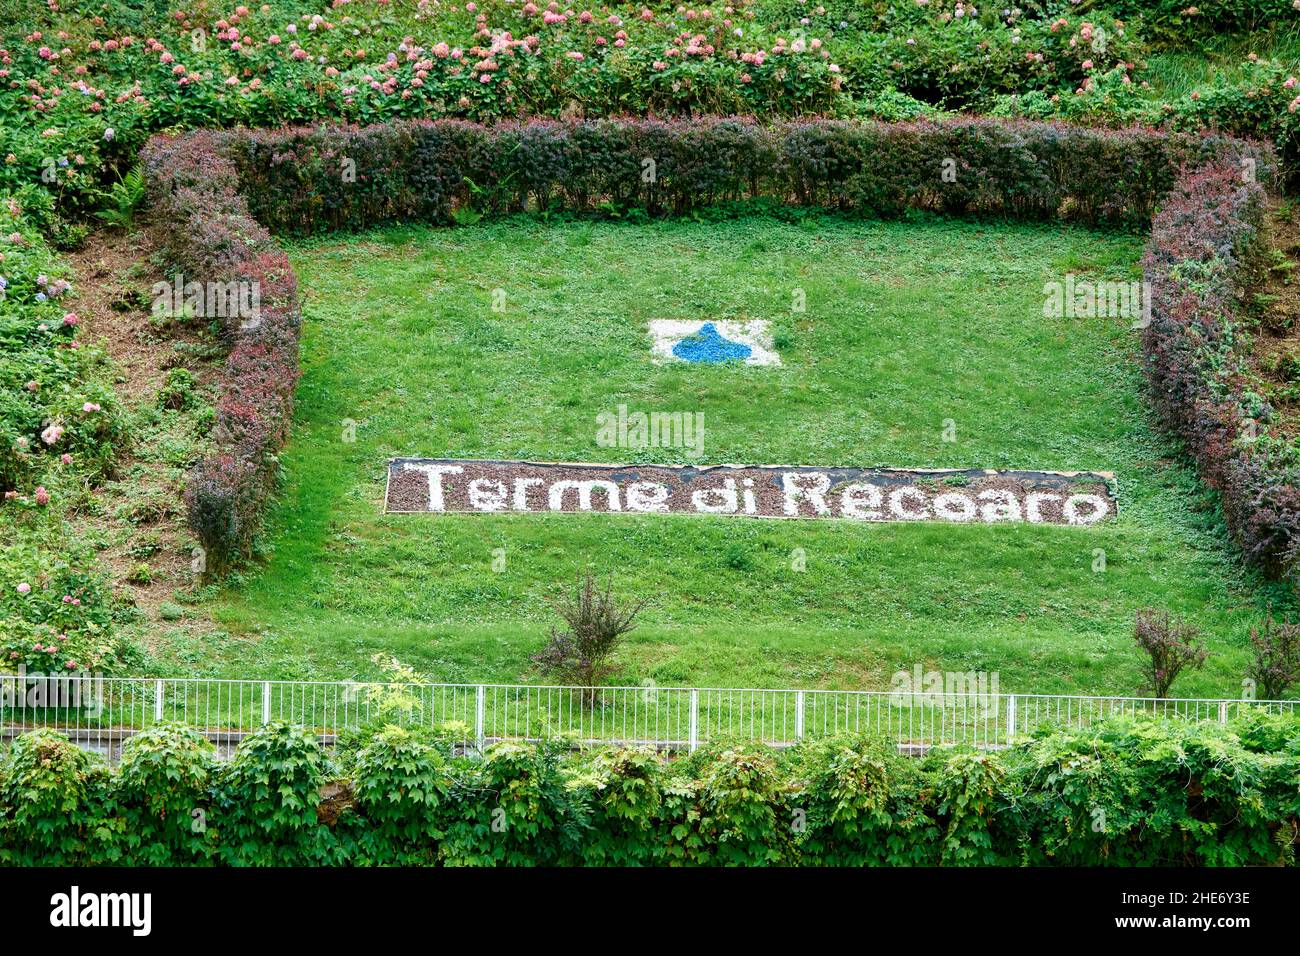 The word Recoaro Terme is written on the ground of a flower bed in the park of the thermal complex of Recoaro in Italy Stock Photo